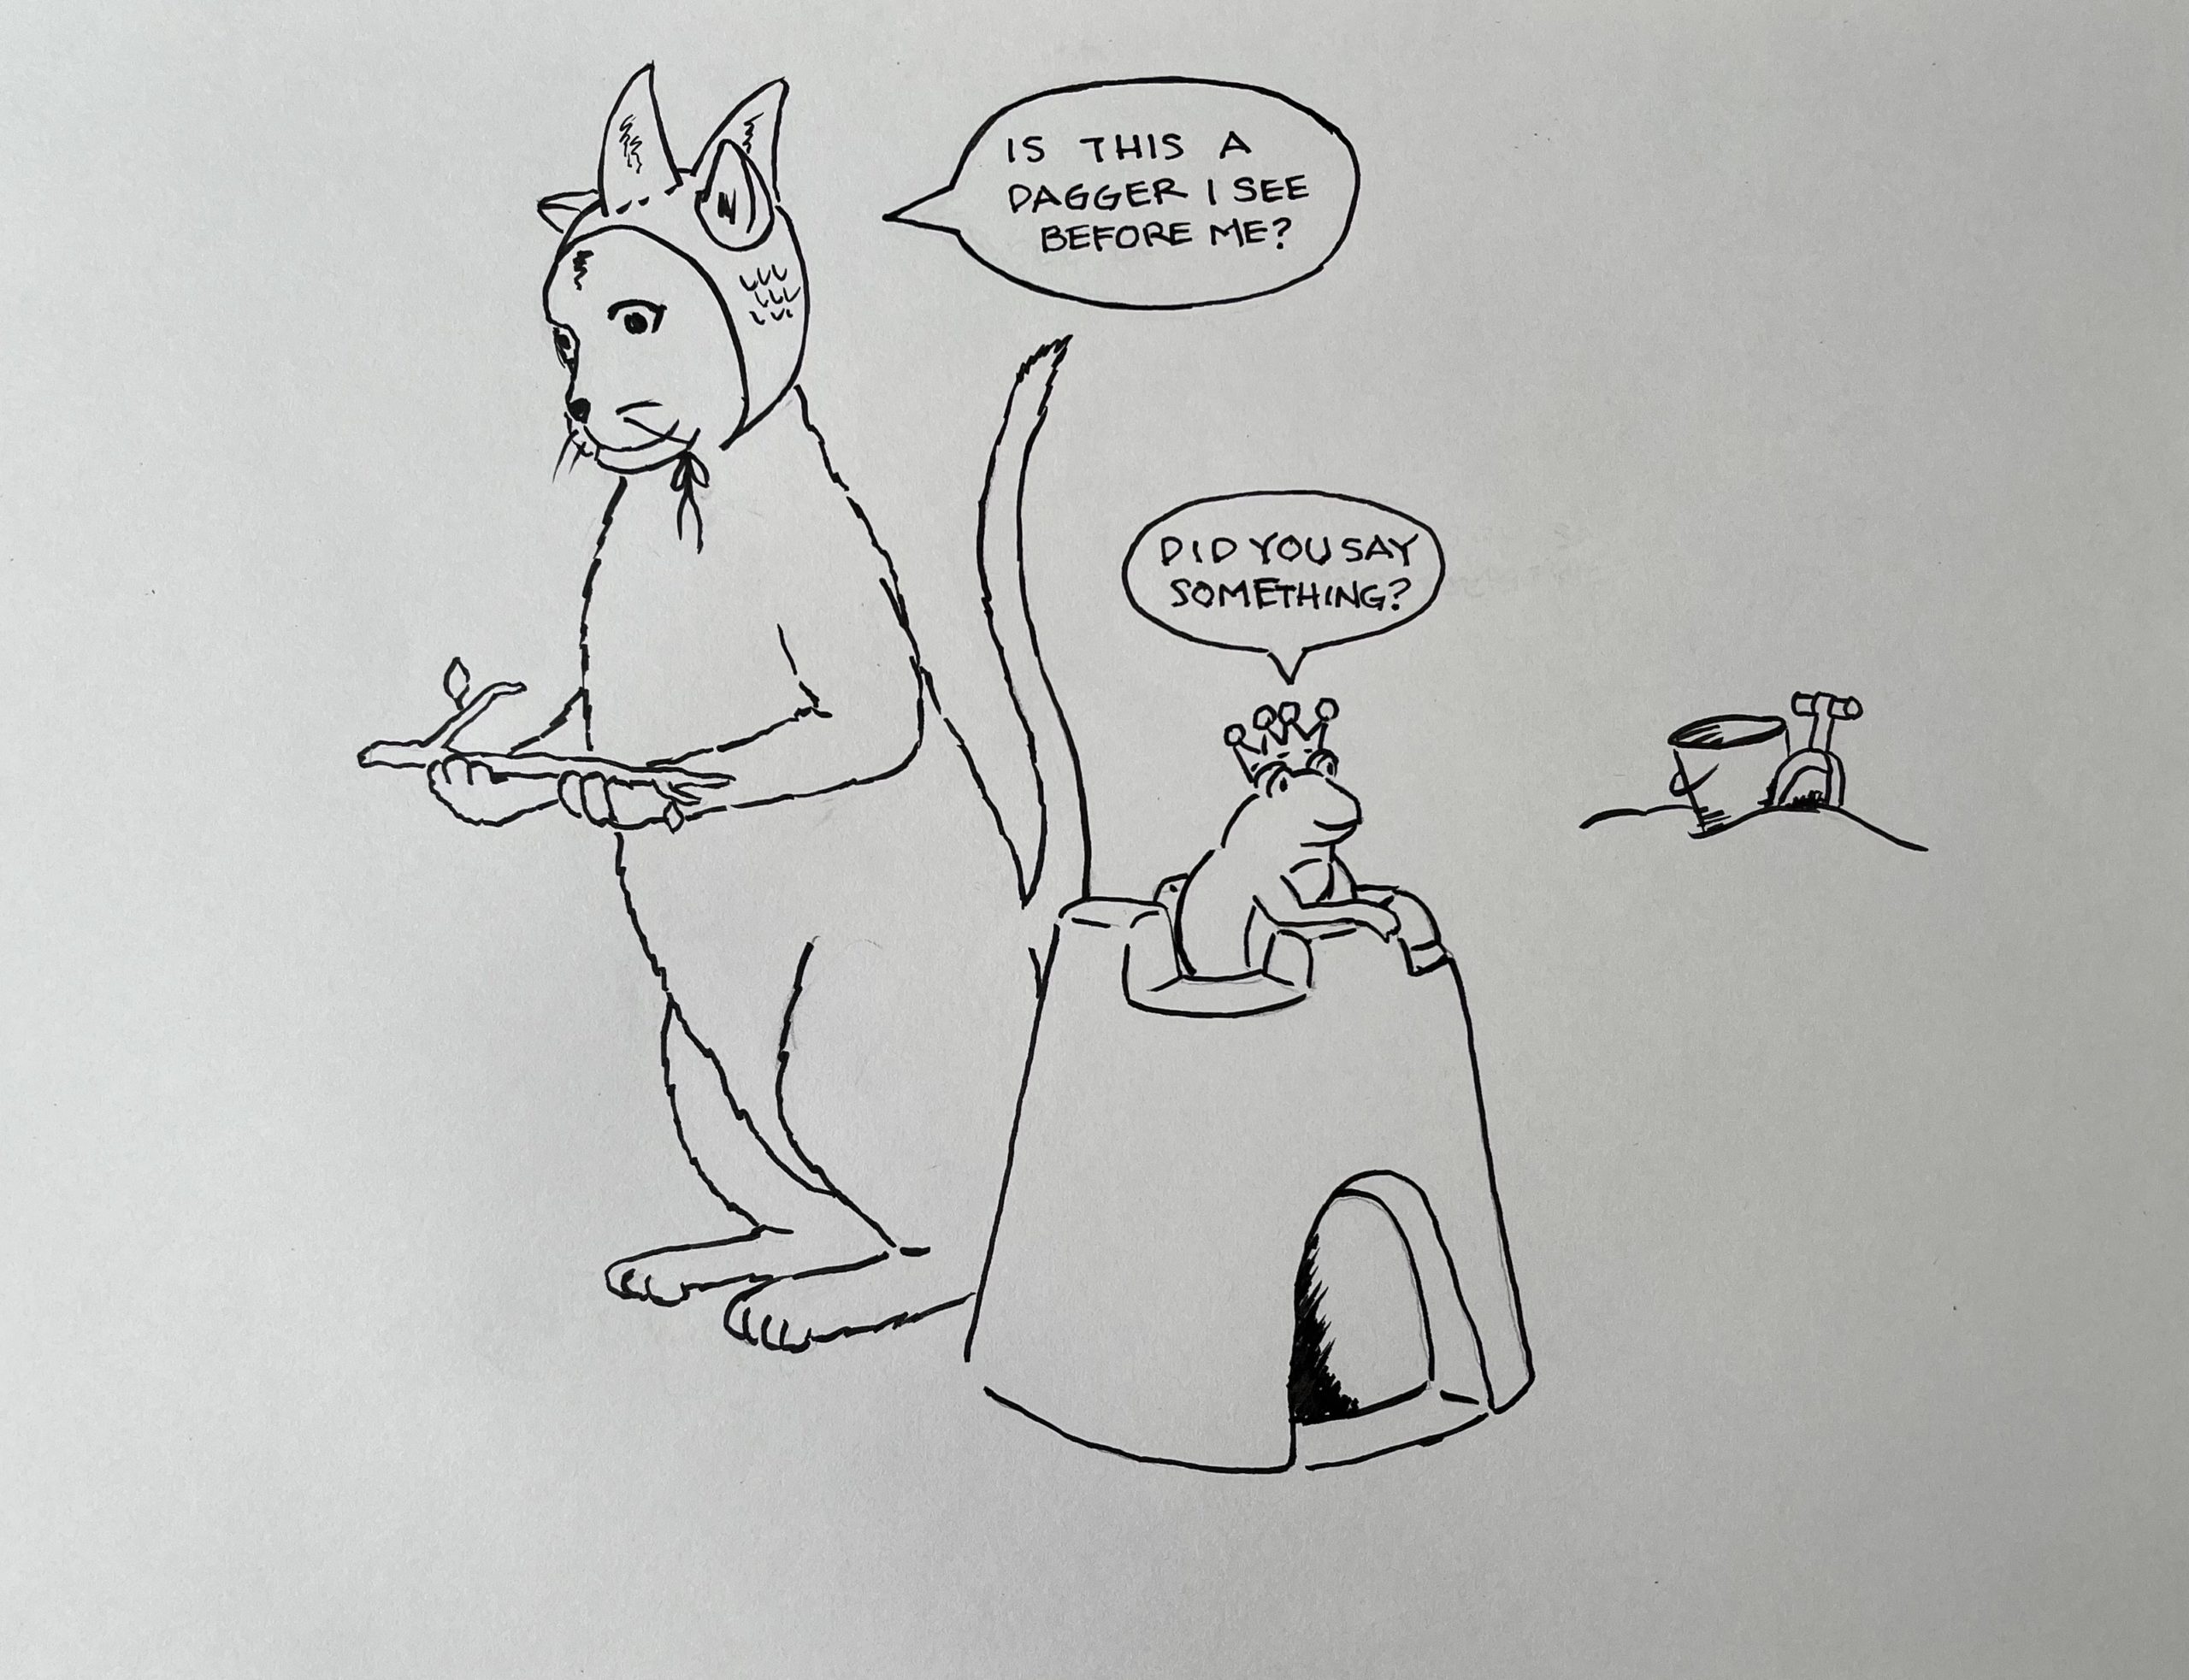 A pen and ink drawing of a cat wearing a costume dragon hat and holding a twig. He's staring at the twig asking "Is this a dagger I see before me?", quoting MacBeth. The frog remains on the sand castle and asks the cat "Did you say something?"